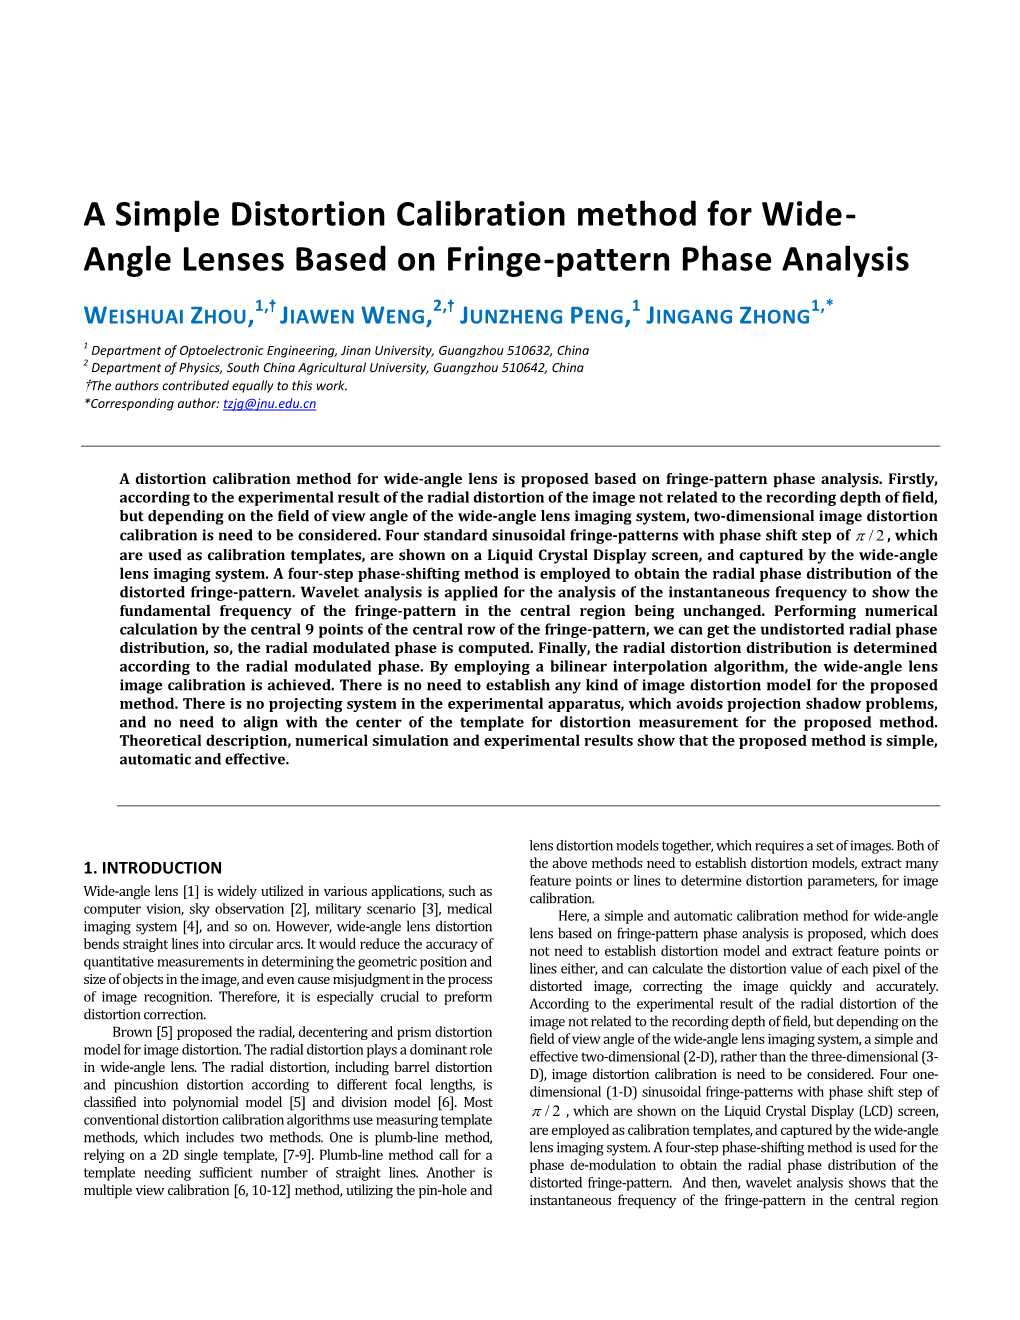 A Simple Distortion Calibration Method for Wide- Angle Lenses Based on Fringe-Pattern Phase Analysis